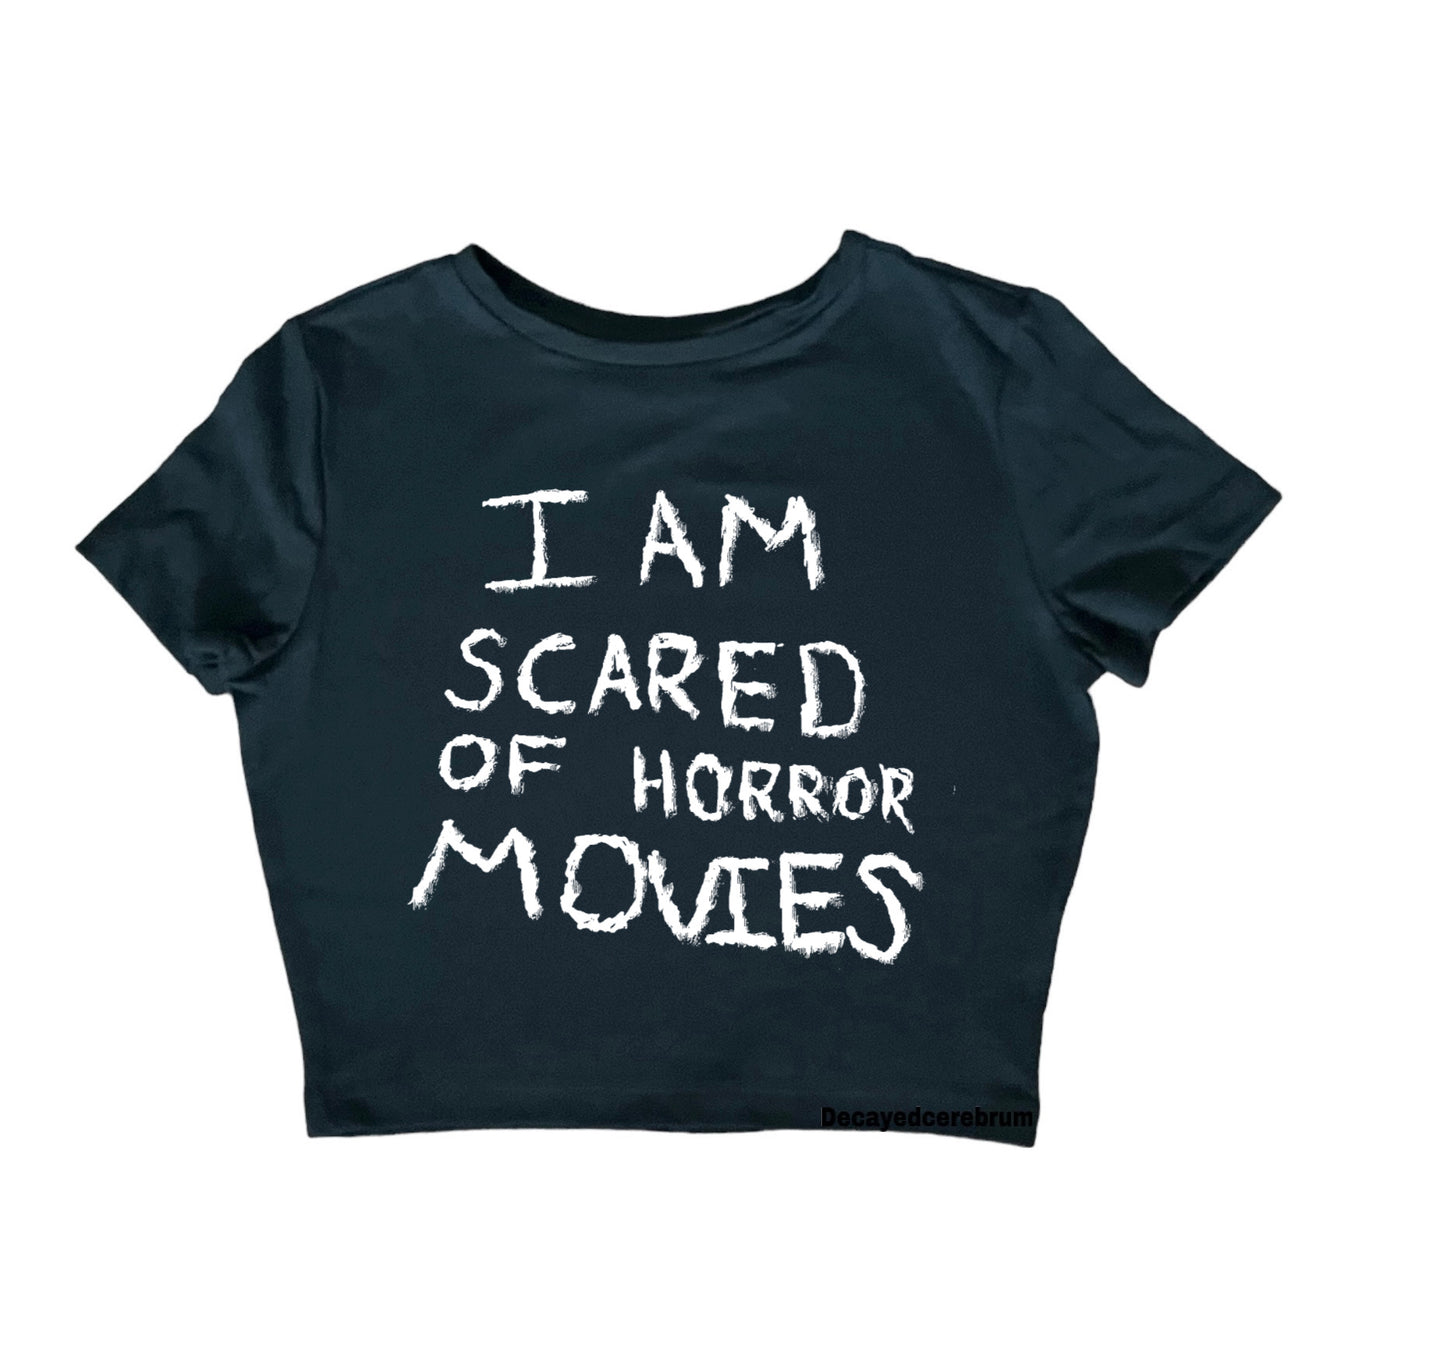 I’m scared of horror movies cropped baby tee